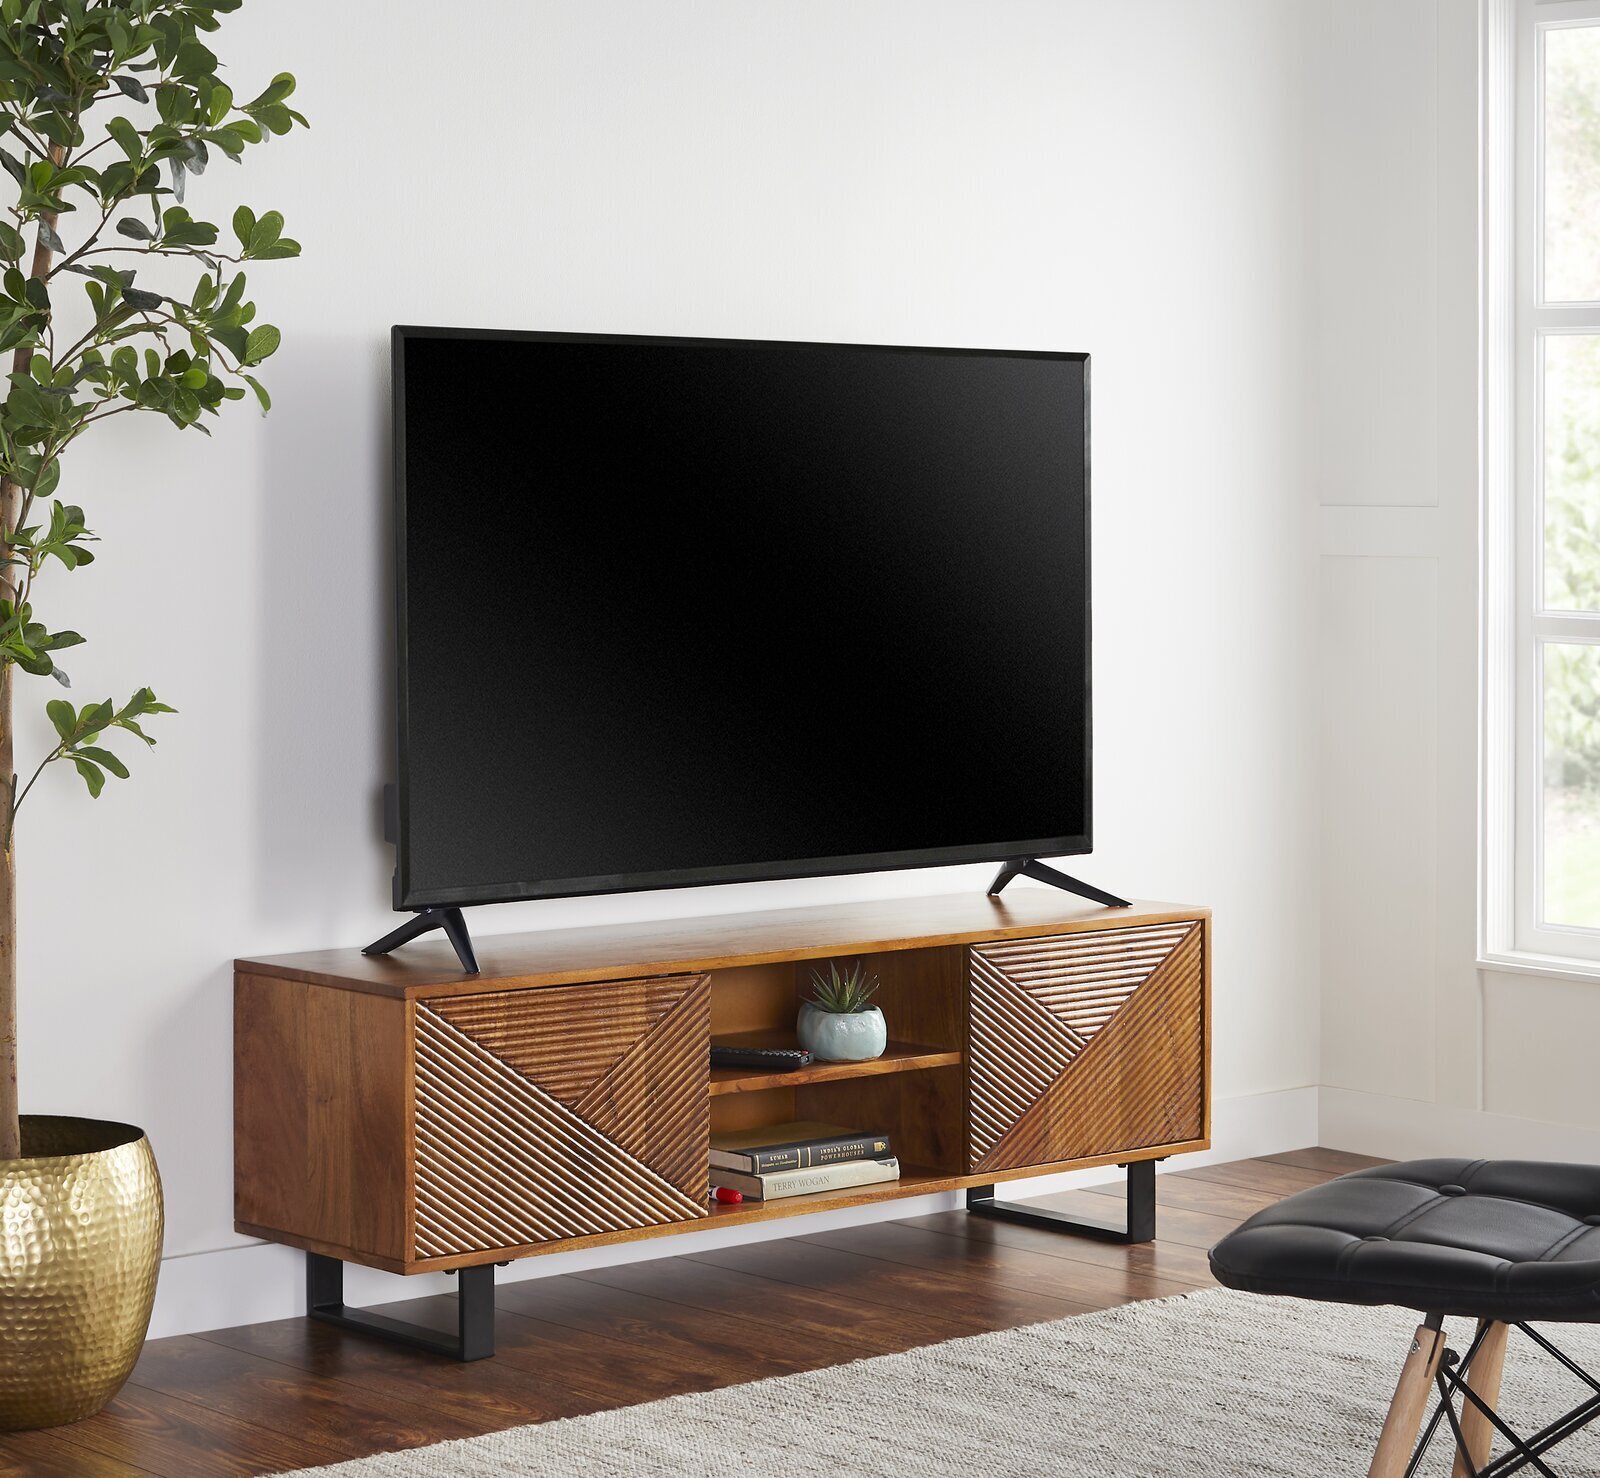 Wood Cool TV Stand With Linear Pattern On Cabinets 